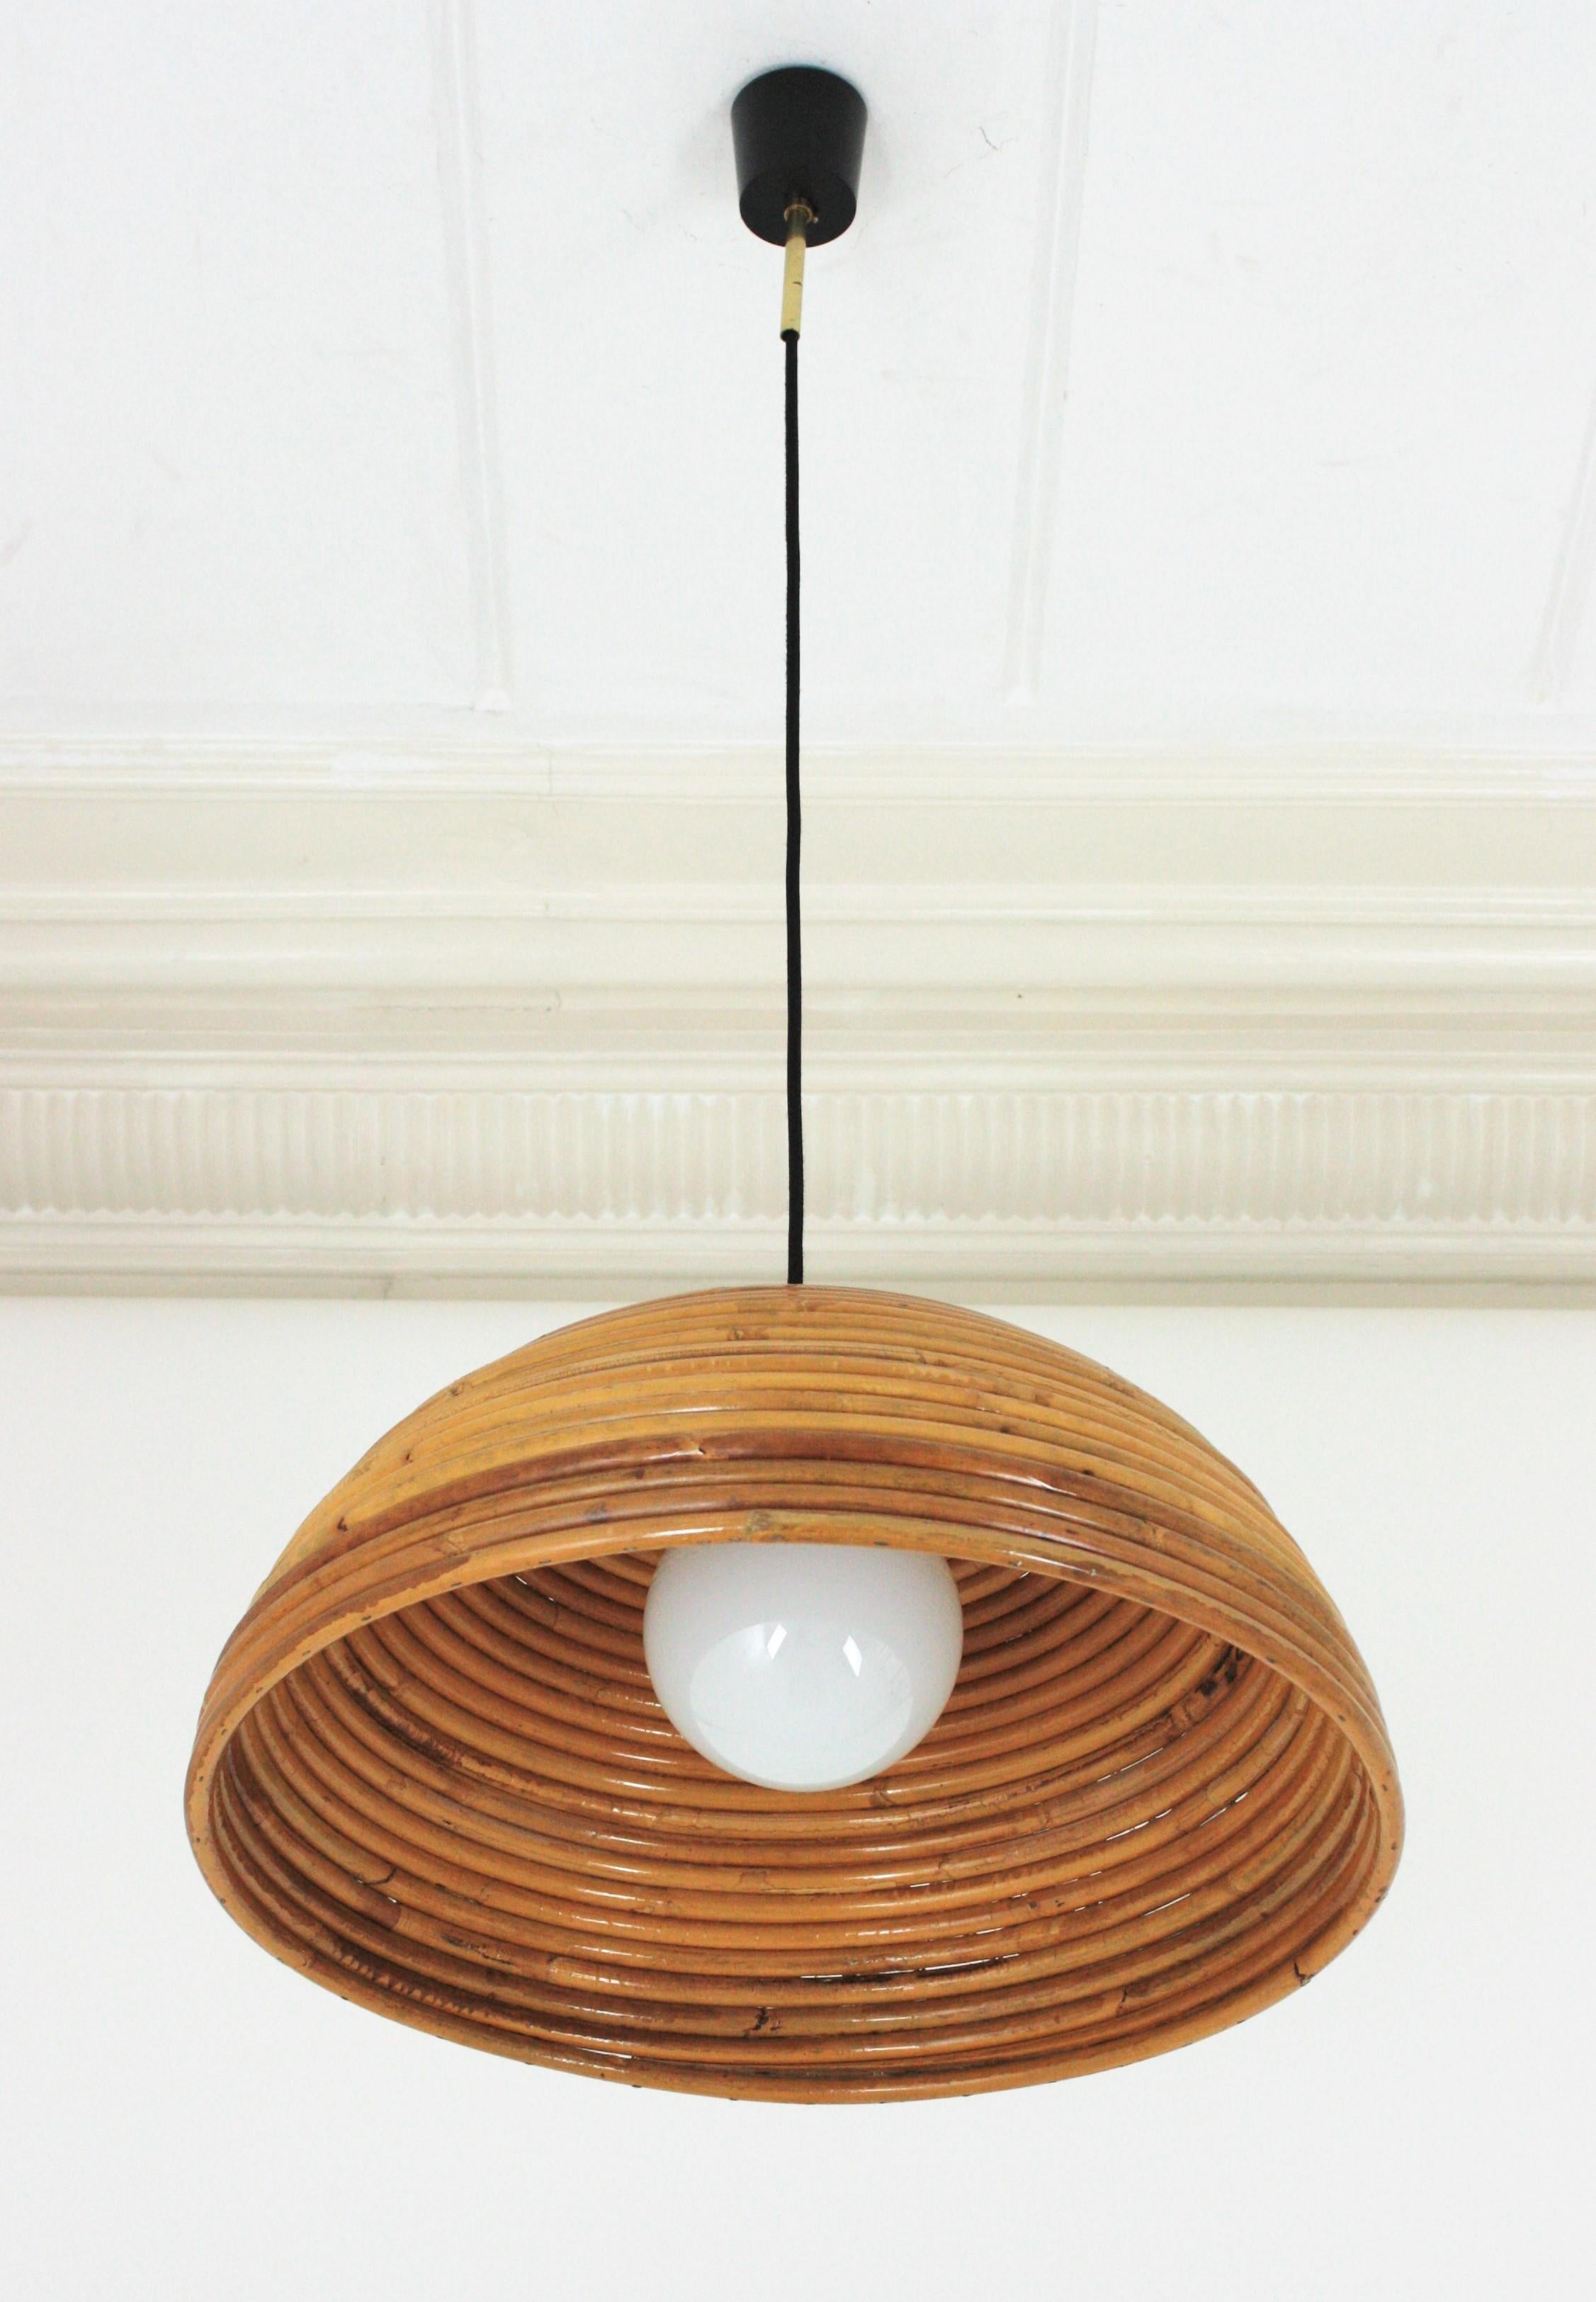 Fungo shaped rattan pencil reed pendant or suspension light, Italy, 1960s.
The design of this pendant is reminiscent of the Fungo model from the Rising Sun collection by Italian designer Gabriella Crespi.
The dome shade is suspended on a black